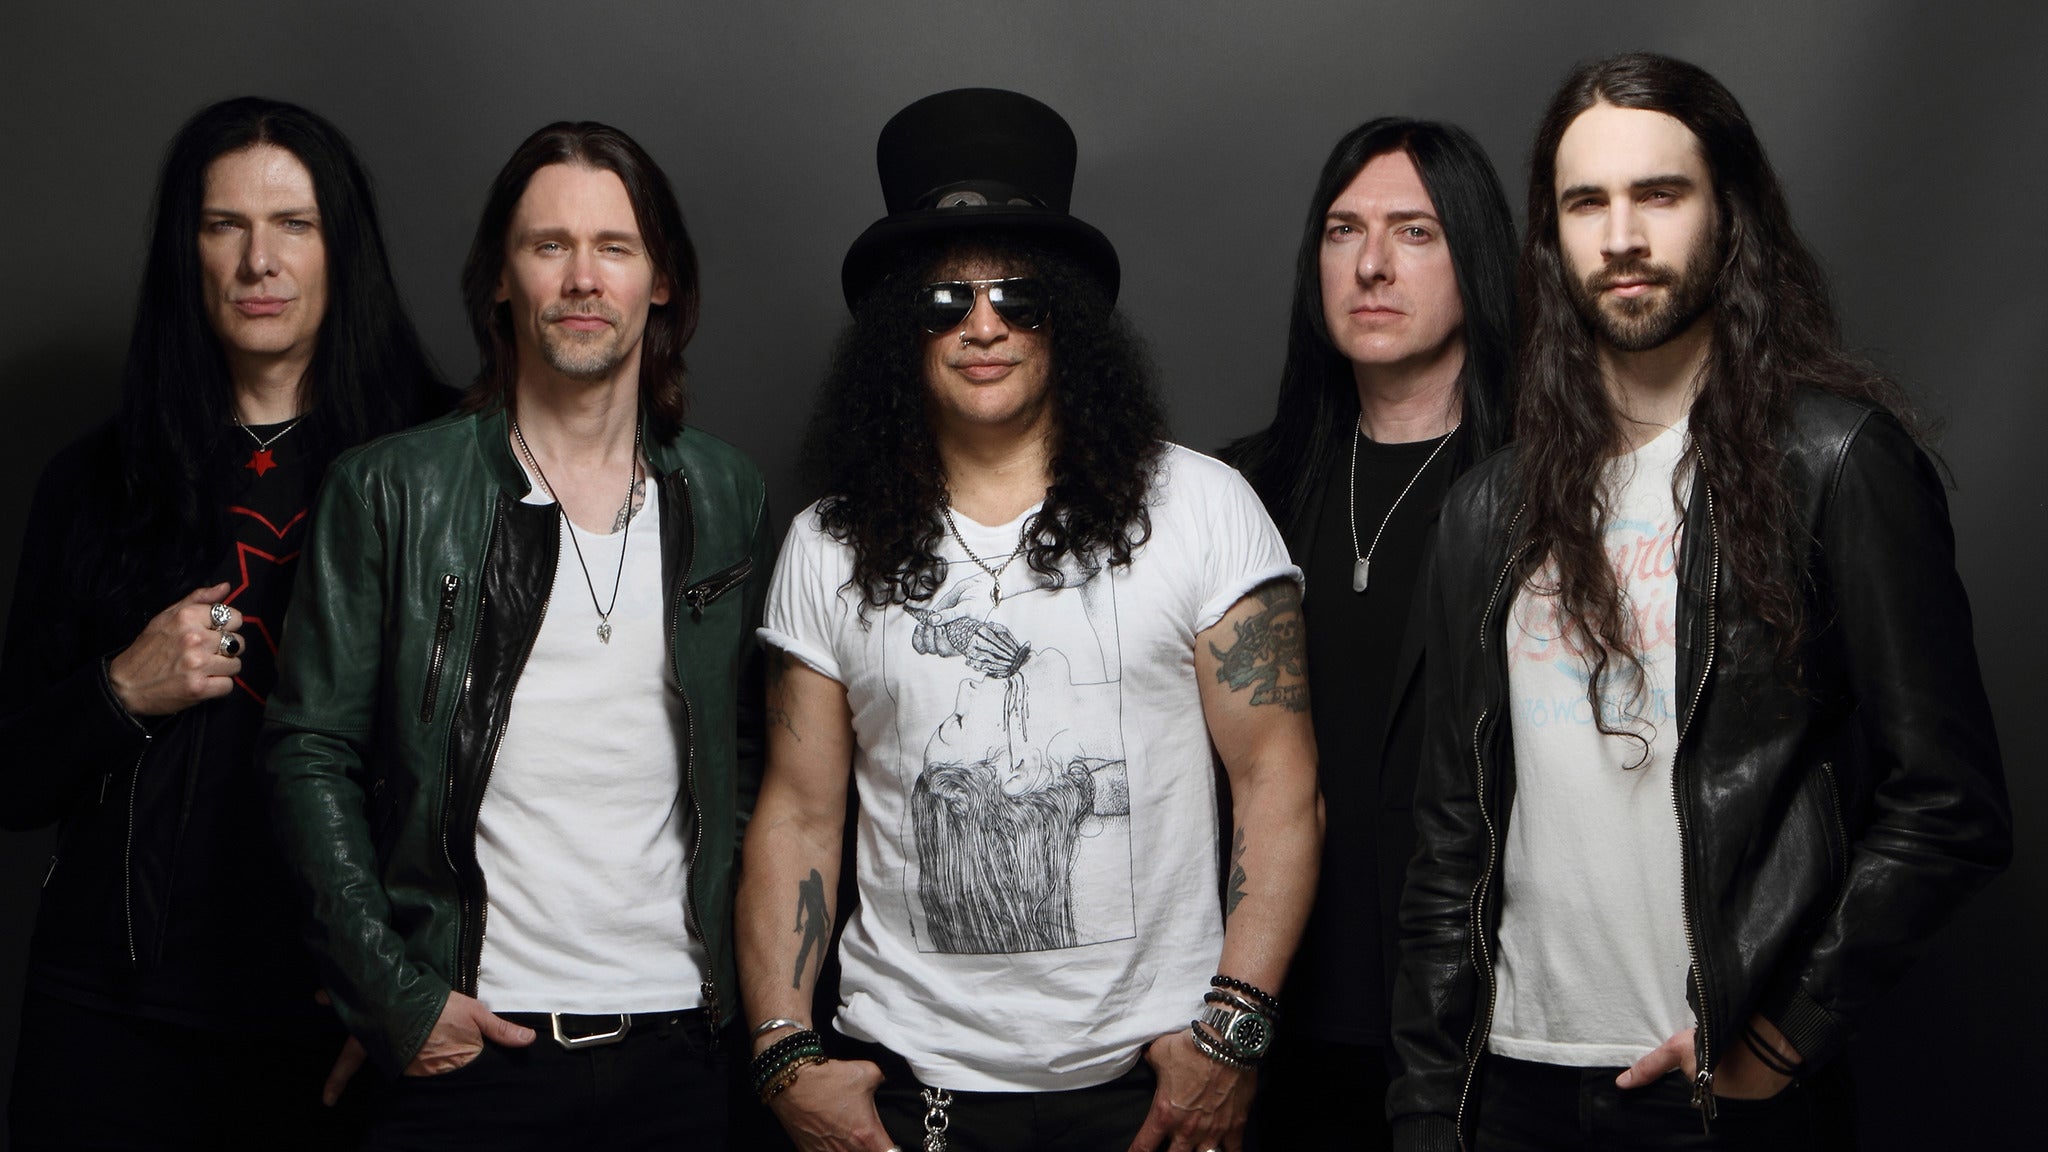 Slash Feat. Myles Kennedy And The Conspirators in Nashville promo photo for Spotify presale offer code